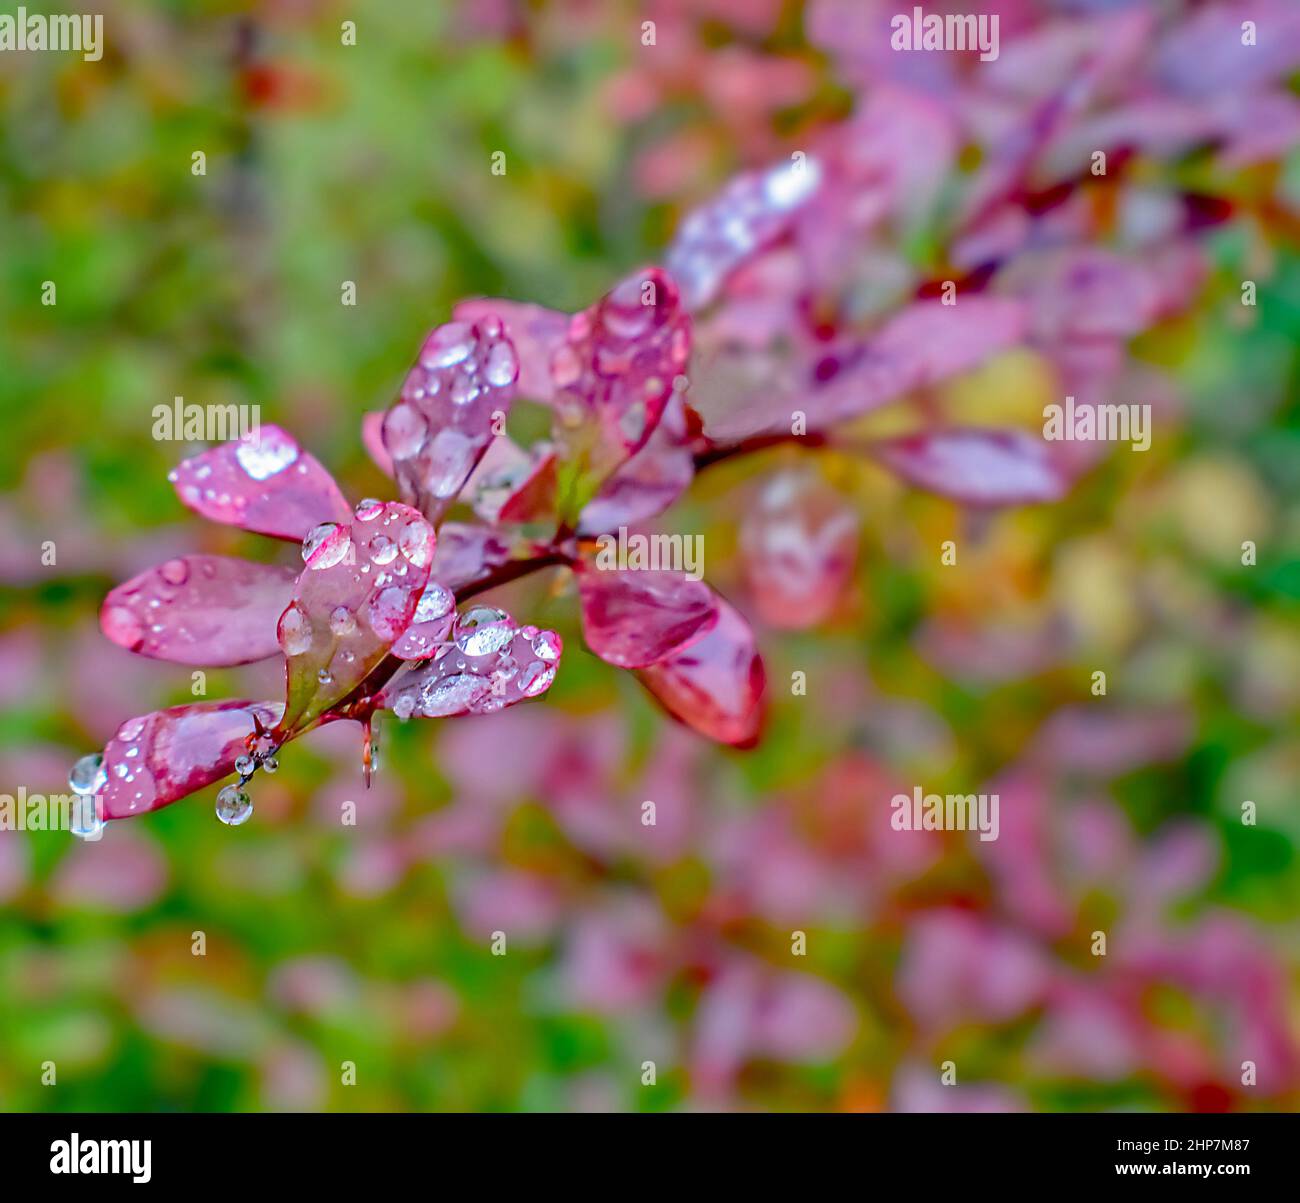 Transparent Raindrops Glisten and Shimmer in close up on the Purple Leaves Stock Photo